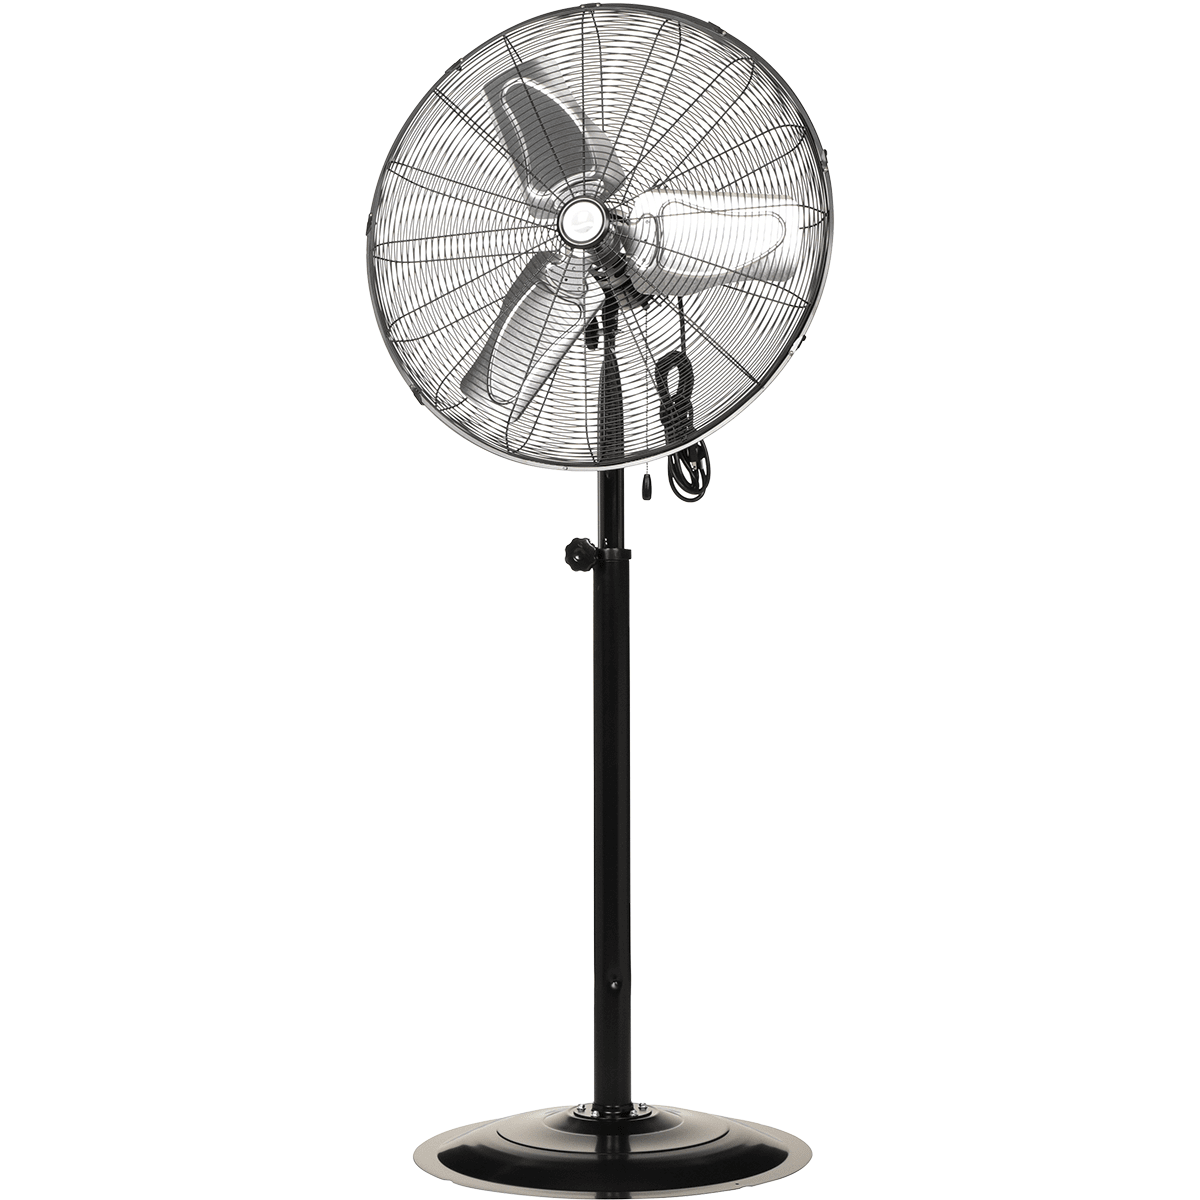 TPI CACU 3-Speed 1/4 HP Fixed Commercial Fan - 24-in. Pedestal Mount